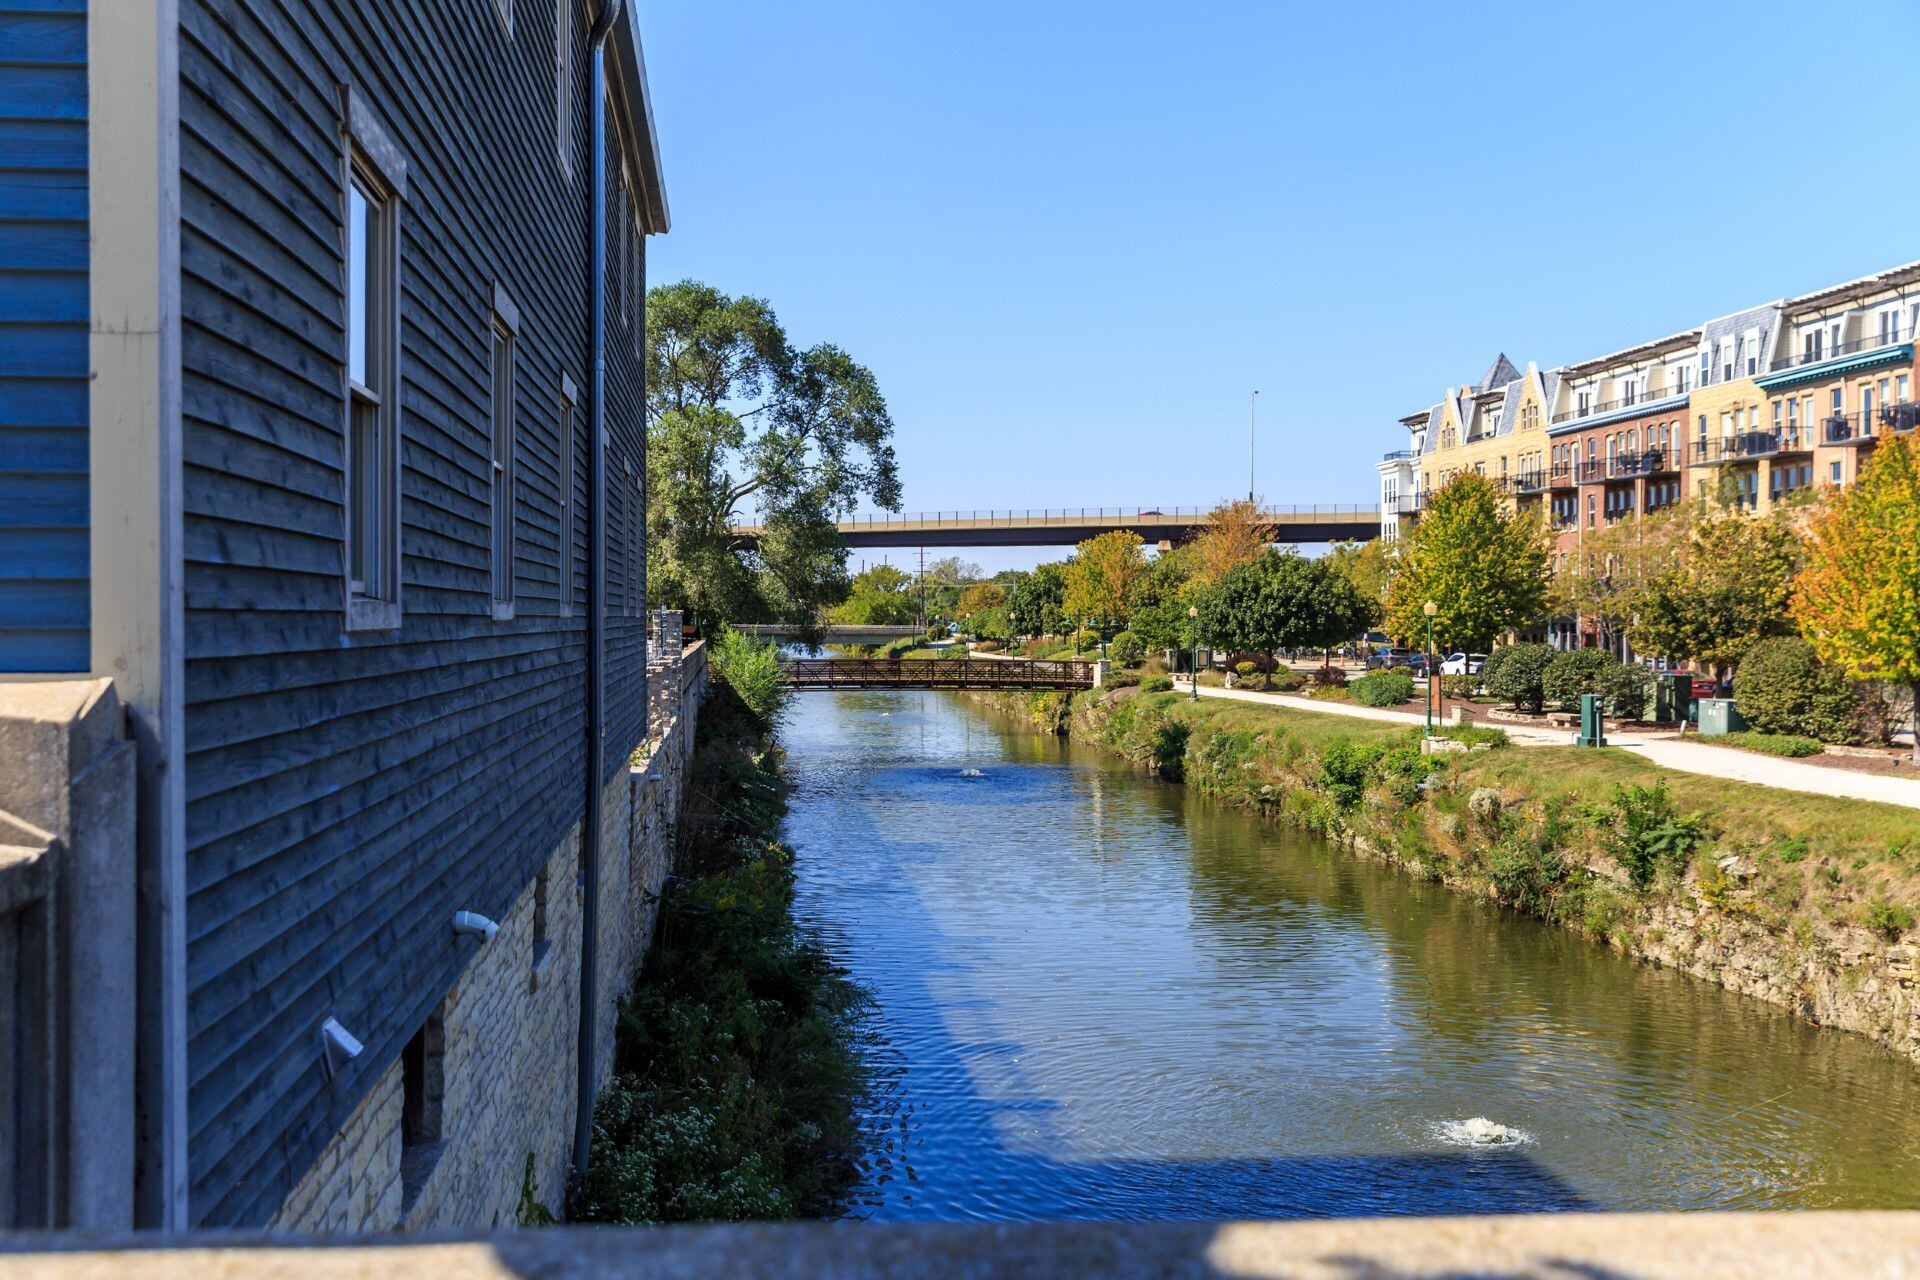 The village of Lemont is celebrating its 150th anniversary this week, with the culmination of the celebration on Friday and Saturday. Pictured is the I&M; Canal in Lemont.